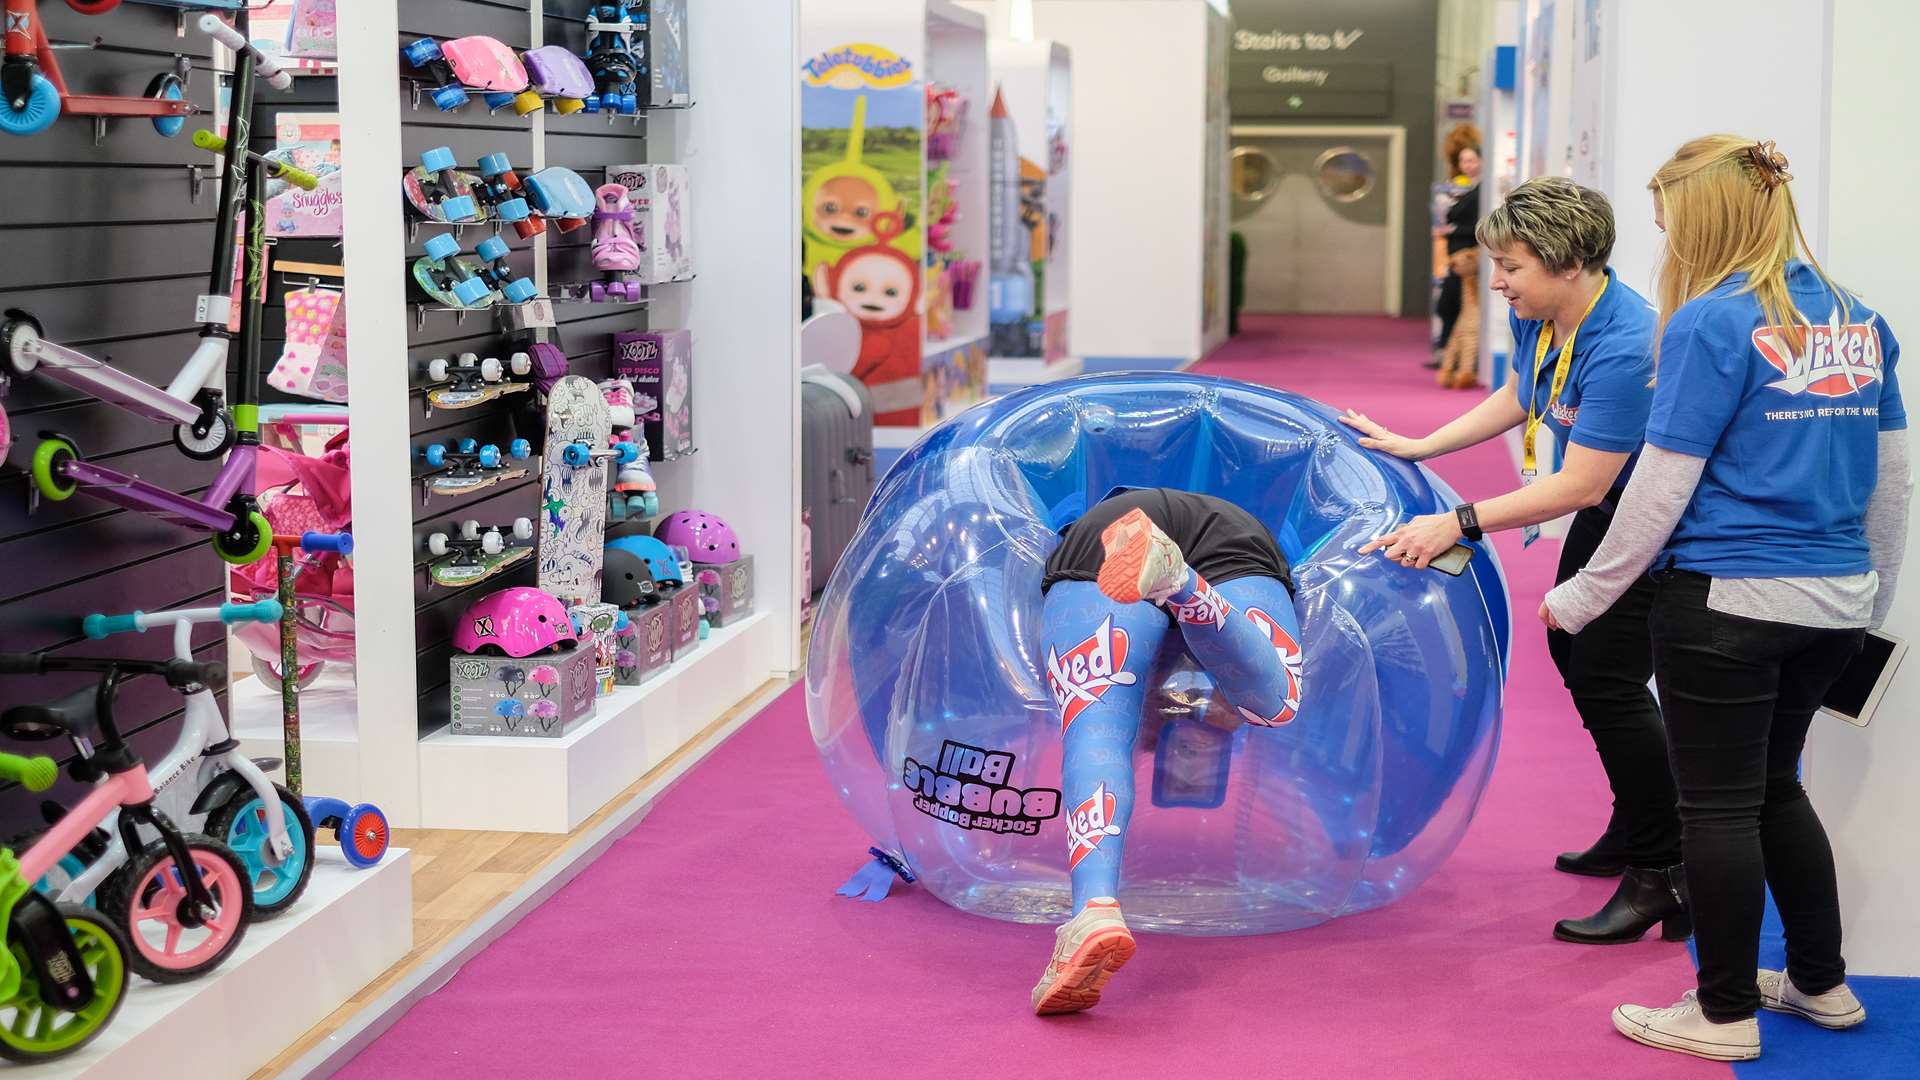 The Wicked Socker Bopper Body Bubble Ball looks set to be one of this year's biggest selling toys